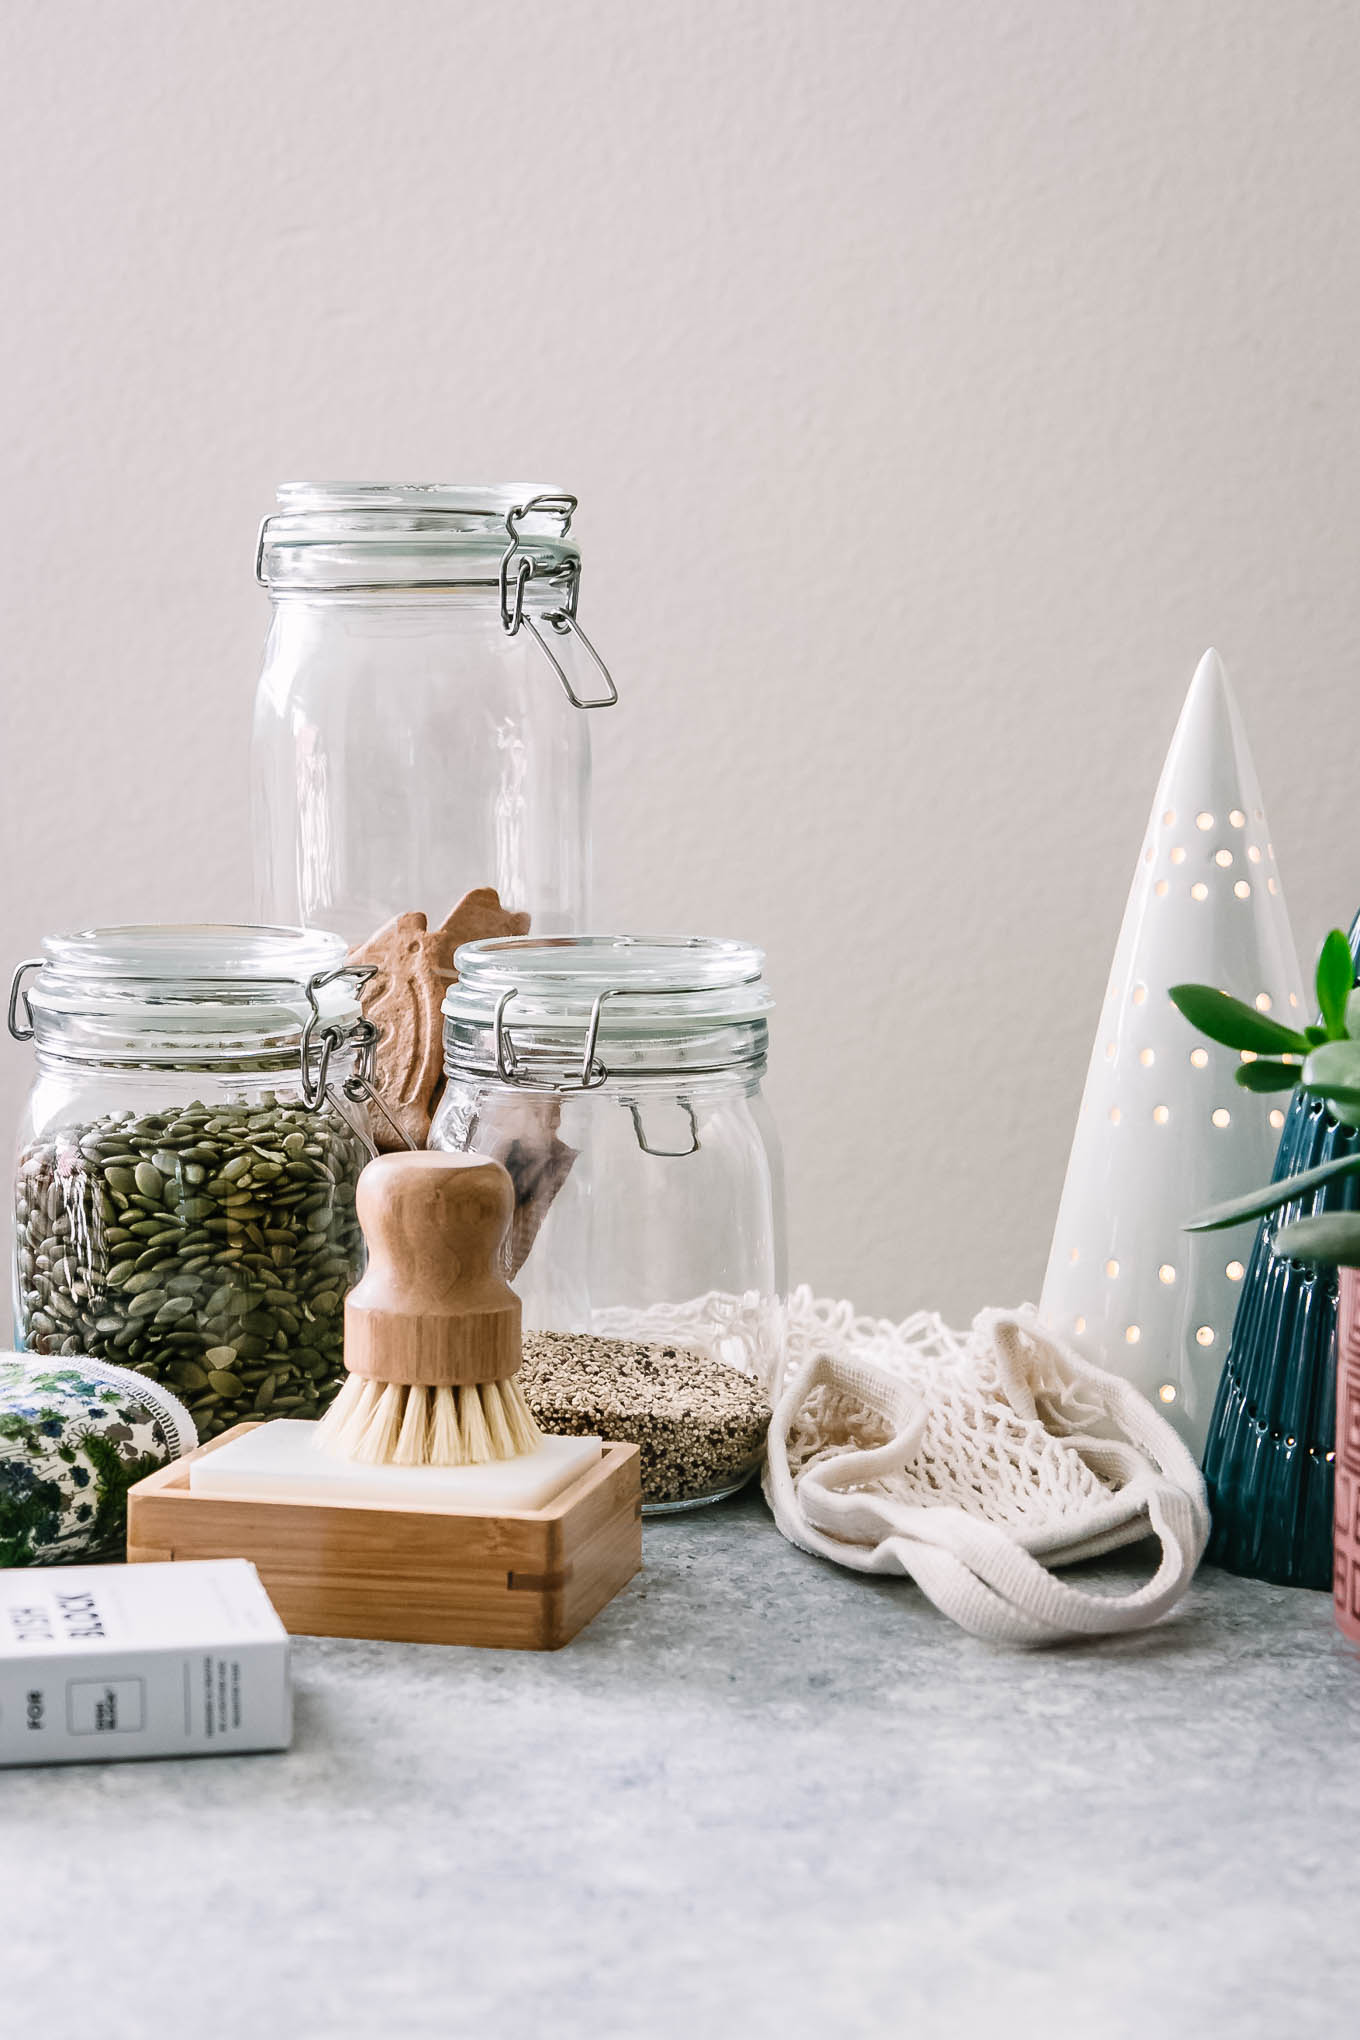 17 Zero Waste Gift Ideas for the Holidays ⋆ Green Gift Guide (2020)